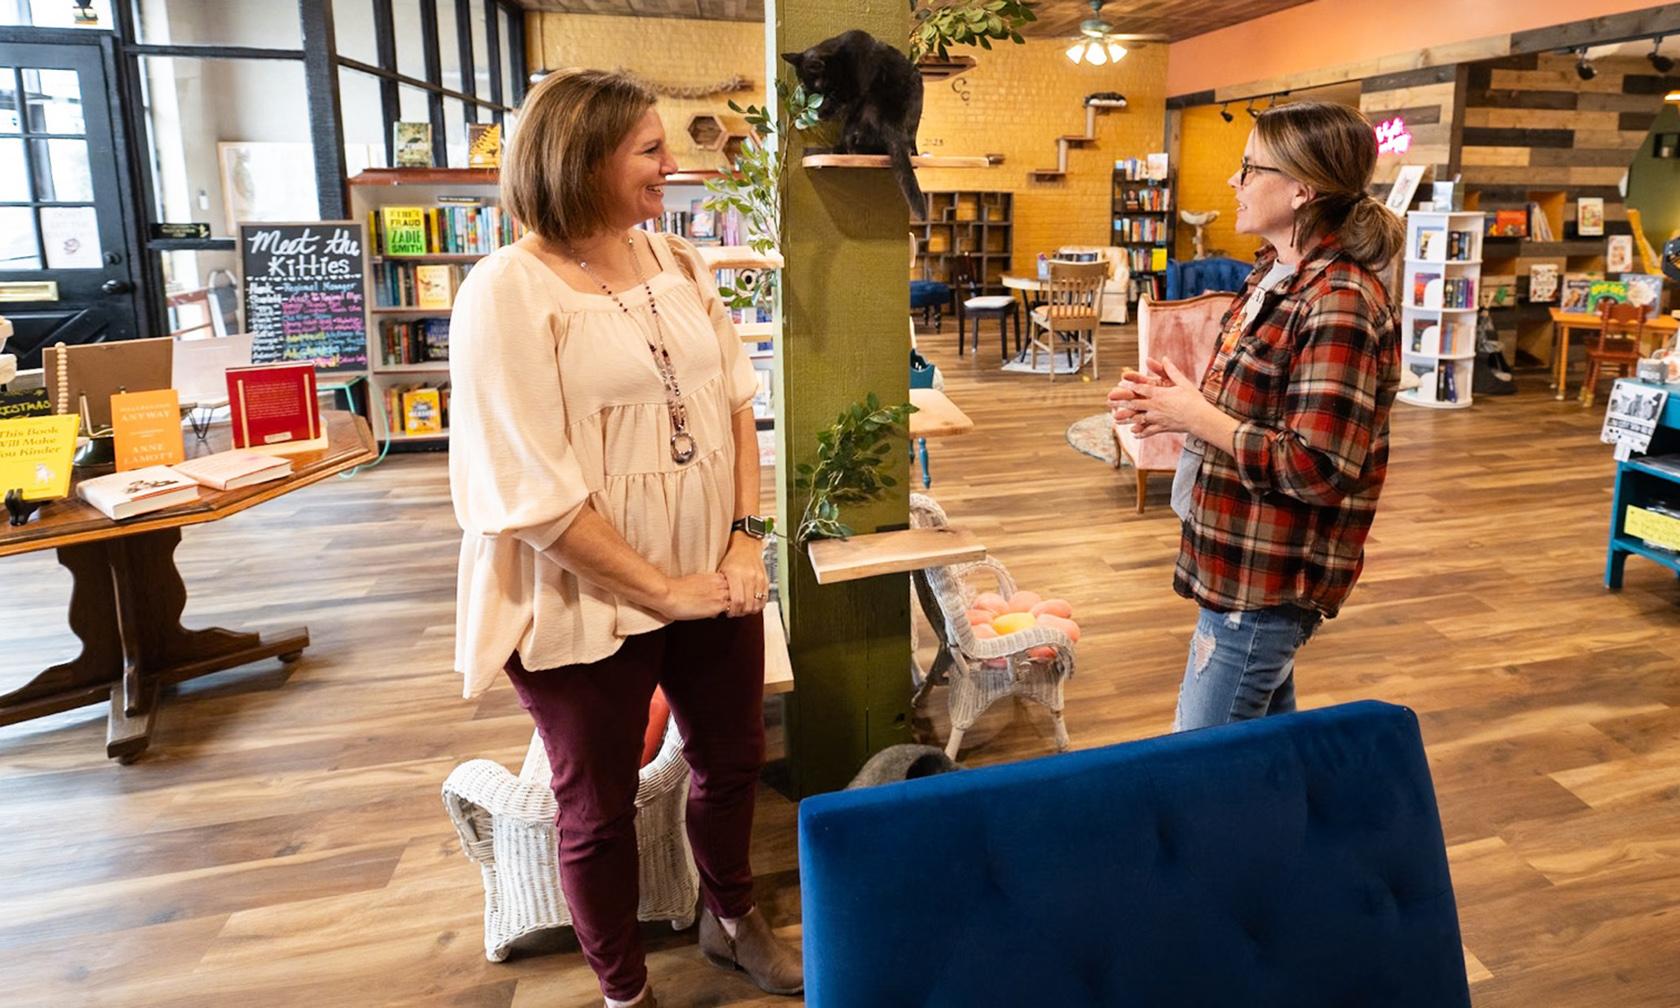 Business counselor visiting with business owner in a bookstore